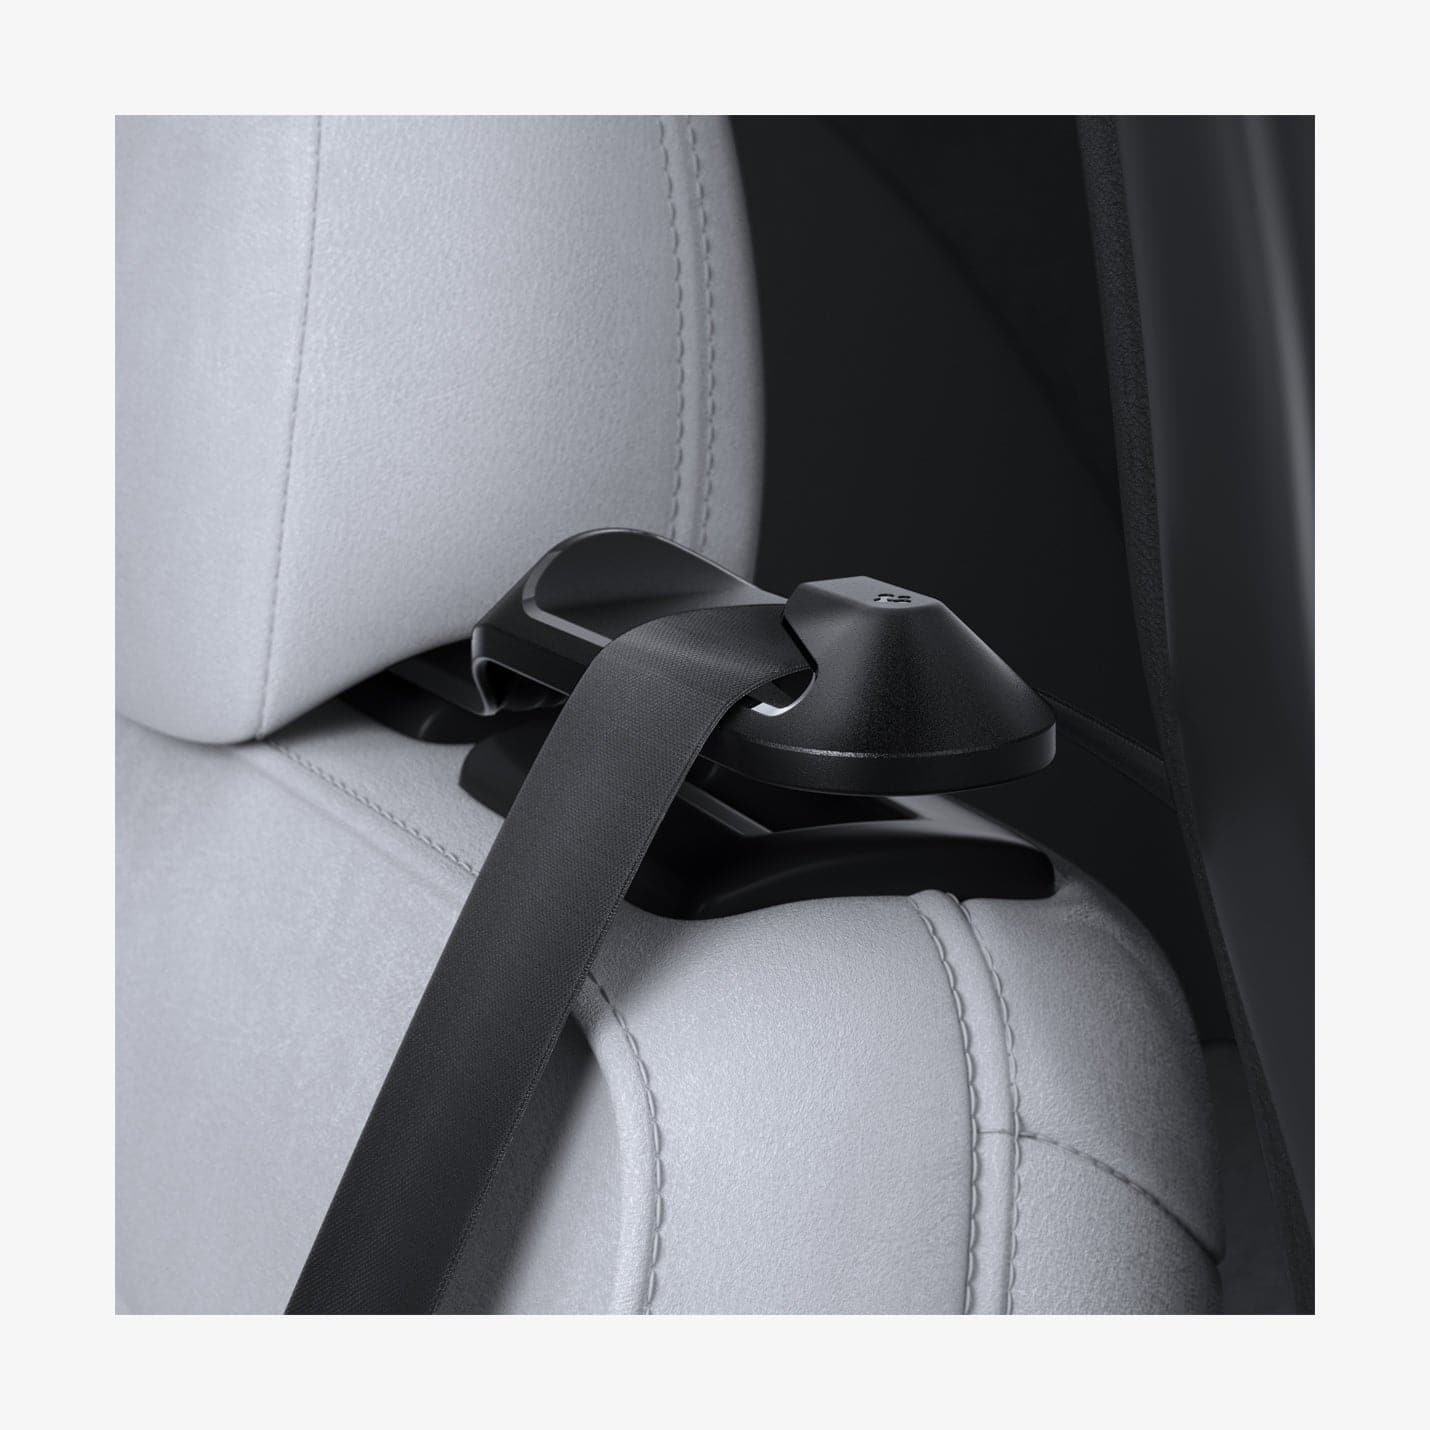 ACP06041 - Tesla Model Y Backseat Seatbelt Guide in black showing the guide with seatbelt installed inside vehicle